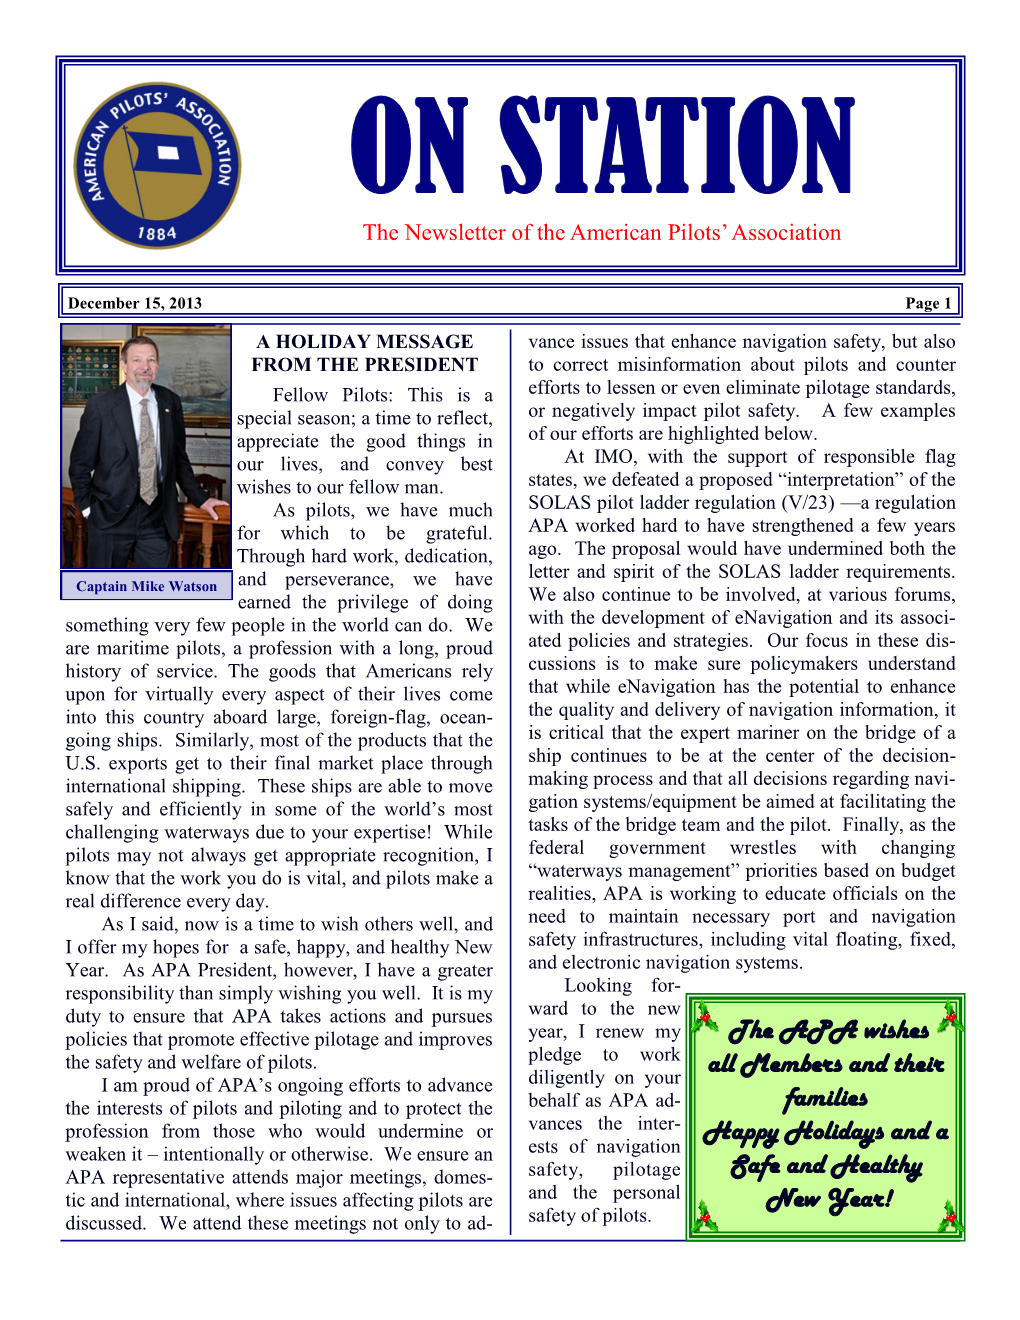 ON STATION the Newsletter of the American Pilots’ Association